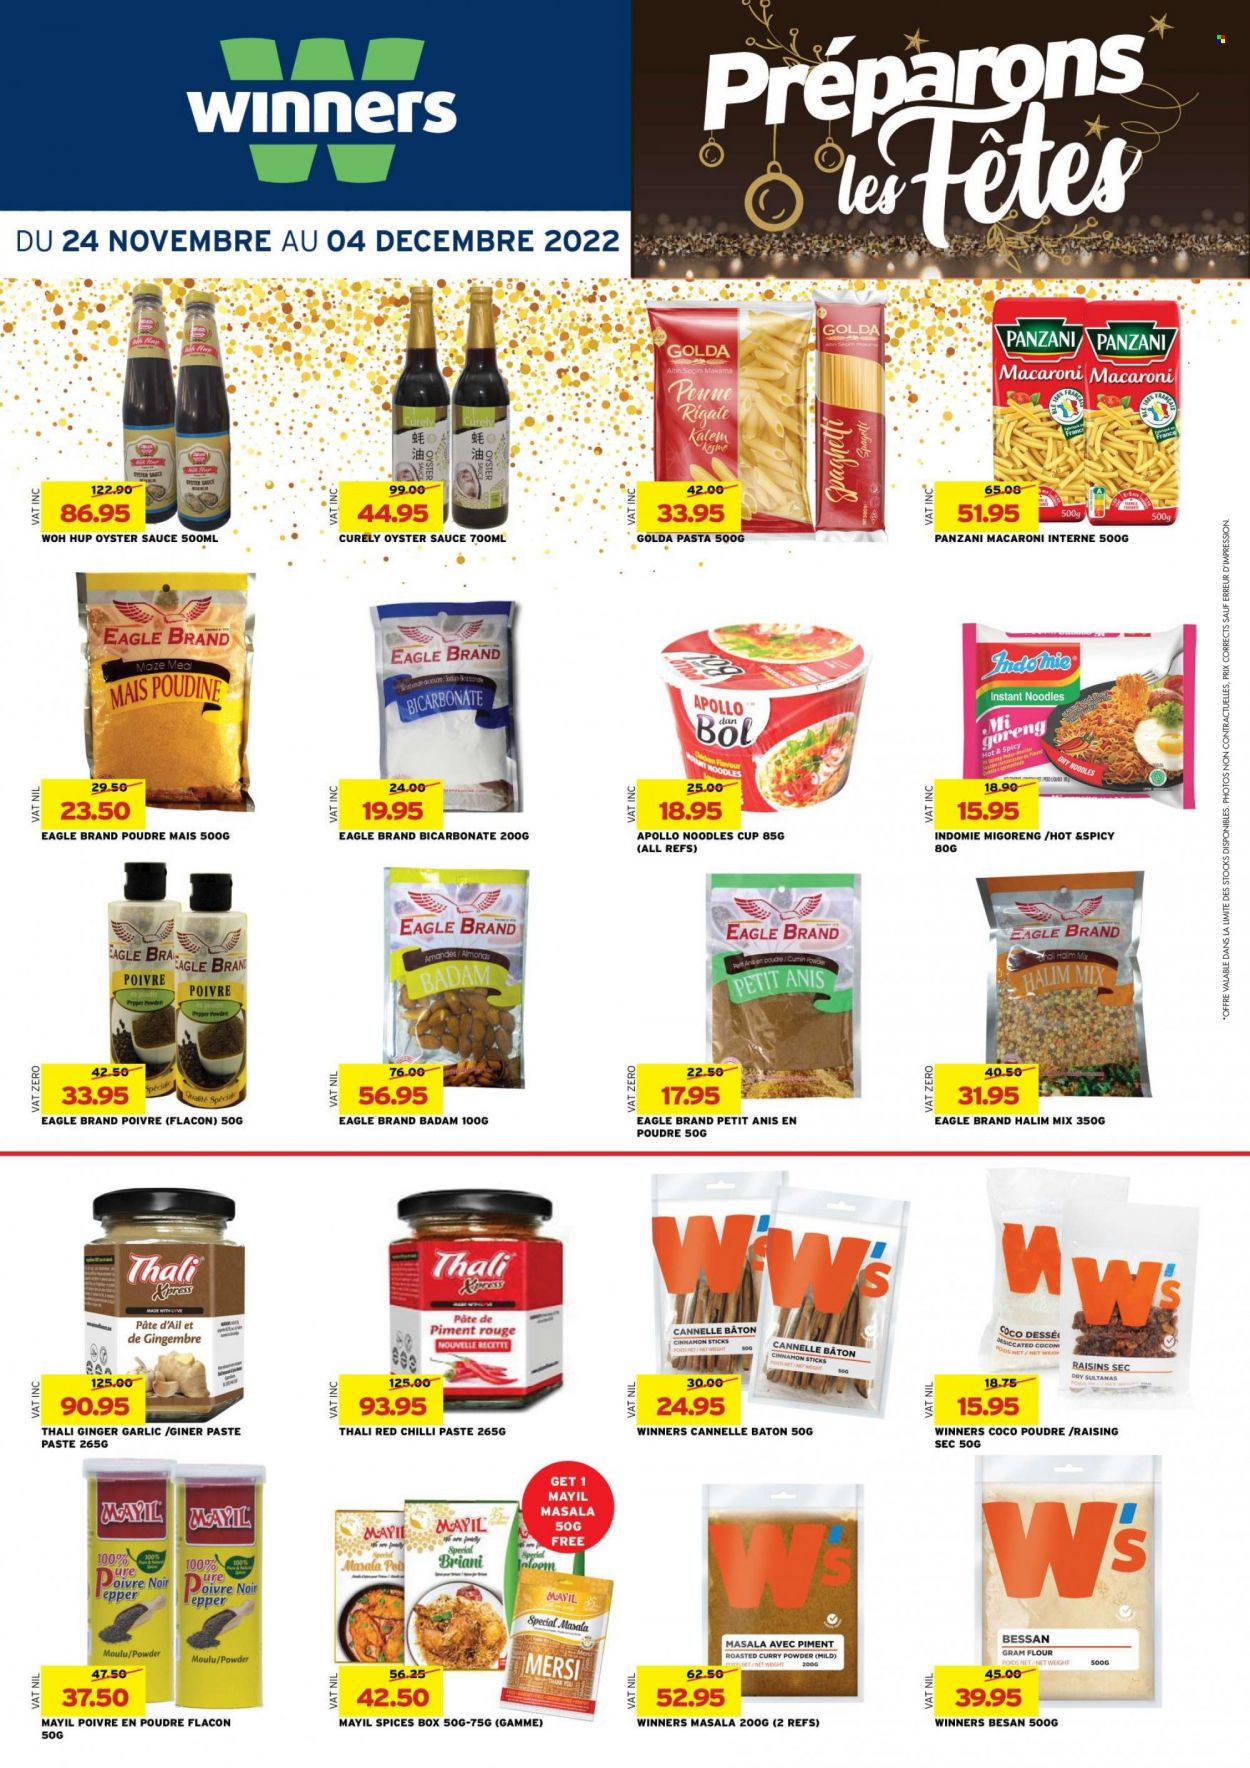 thumbnail - Winner's Catalogue - 24.11.2022 - 4.12.2022 - Sales products - garlic, ginger, oysters, macaroni, pasta, instant noodles, sauce, noodles cup, noodles, flour, gram flour, maize meal, penne, pepper, curry powder, cumin, cinnamon, oyster sauce, almonds, sultanas, dried fruit, cup, raisins. Page 30.